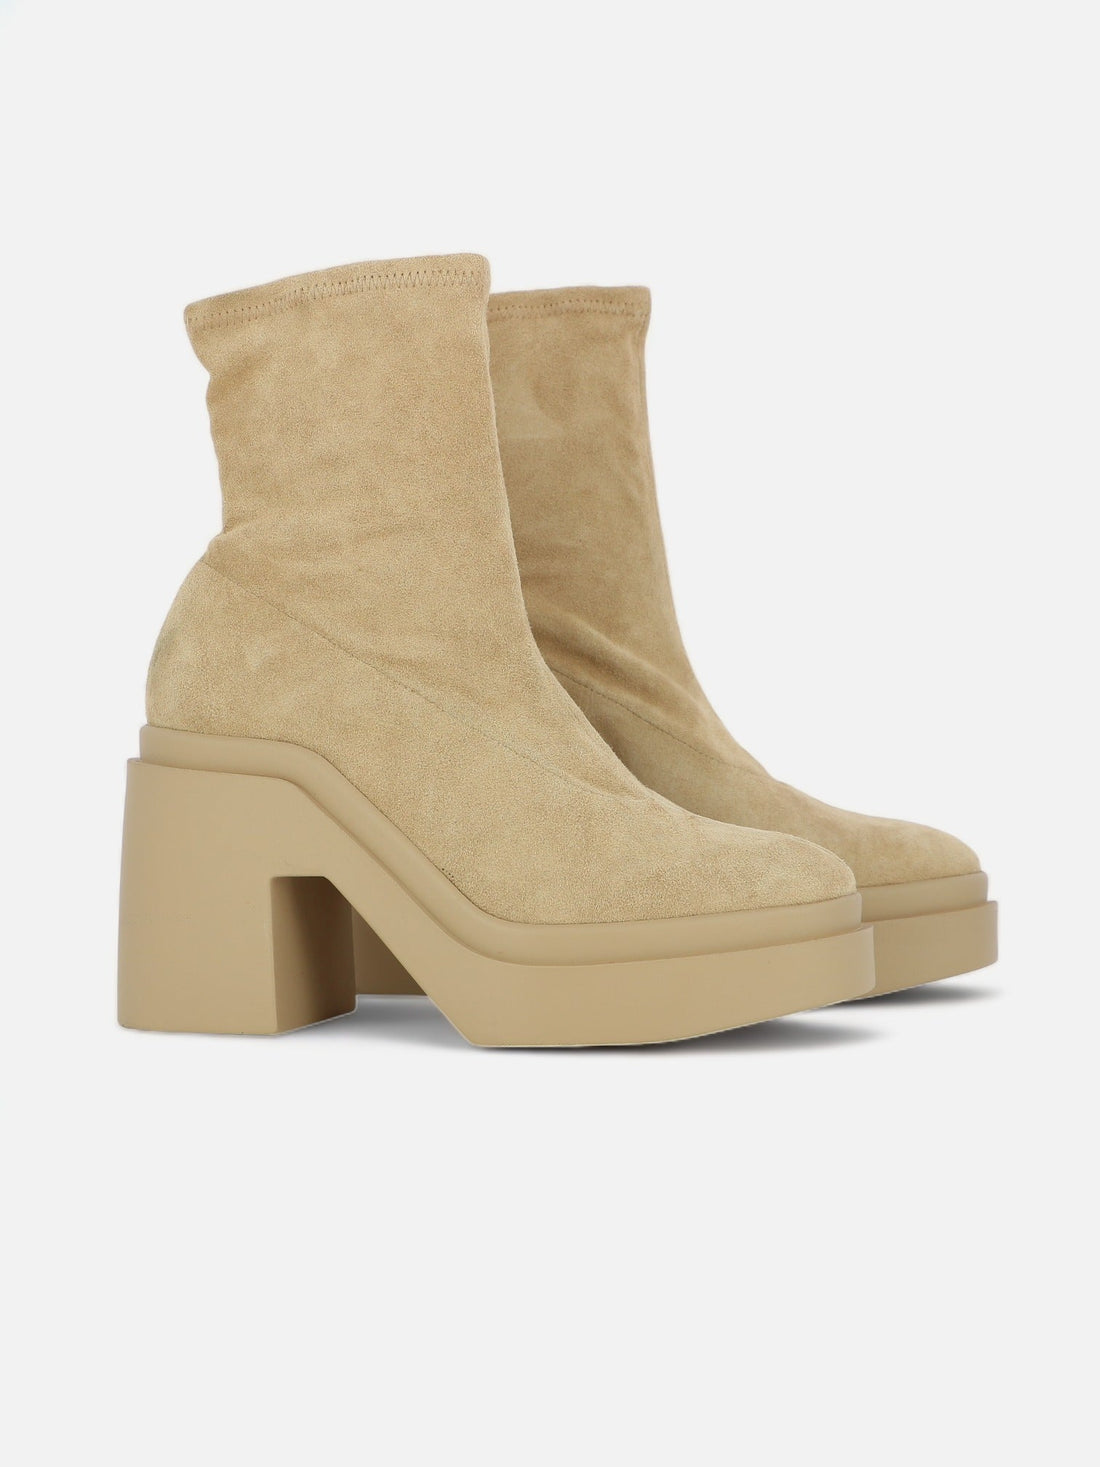 ANKLE BOOTS - NINA ankle boots, suede leather beige - NINA1BEISDEM350 - Clergerie Paris - USA